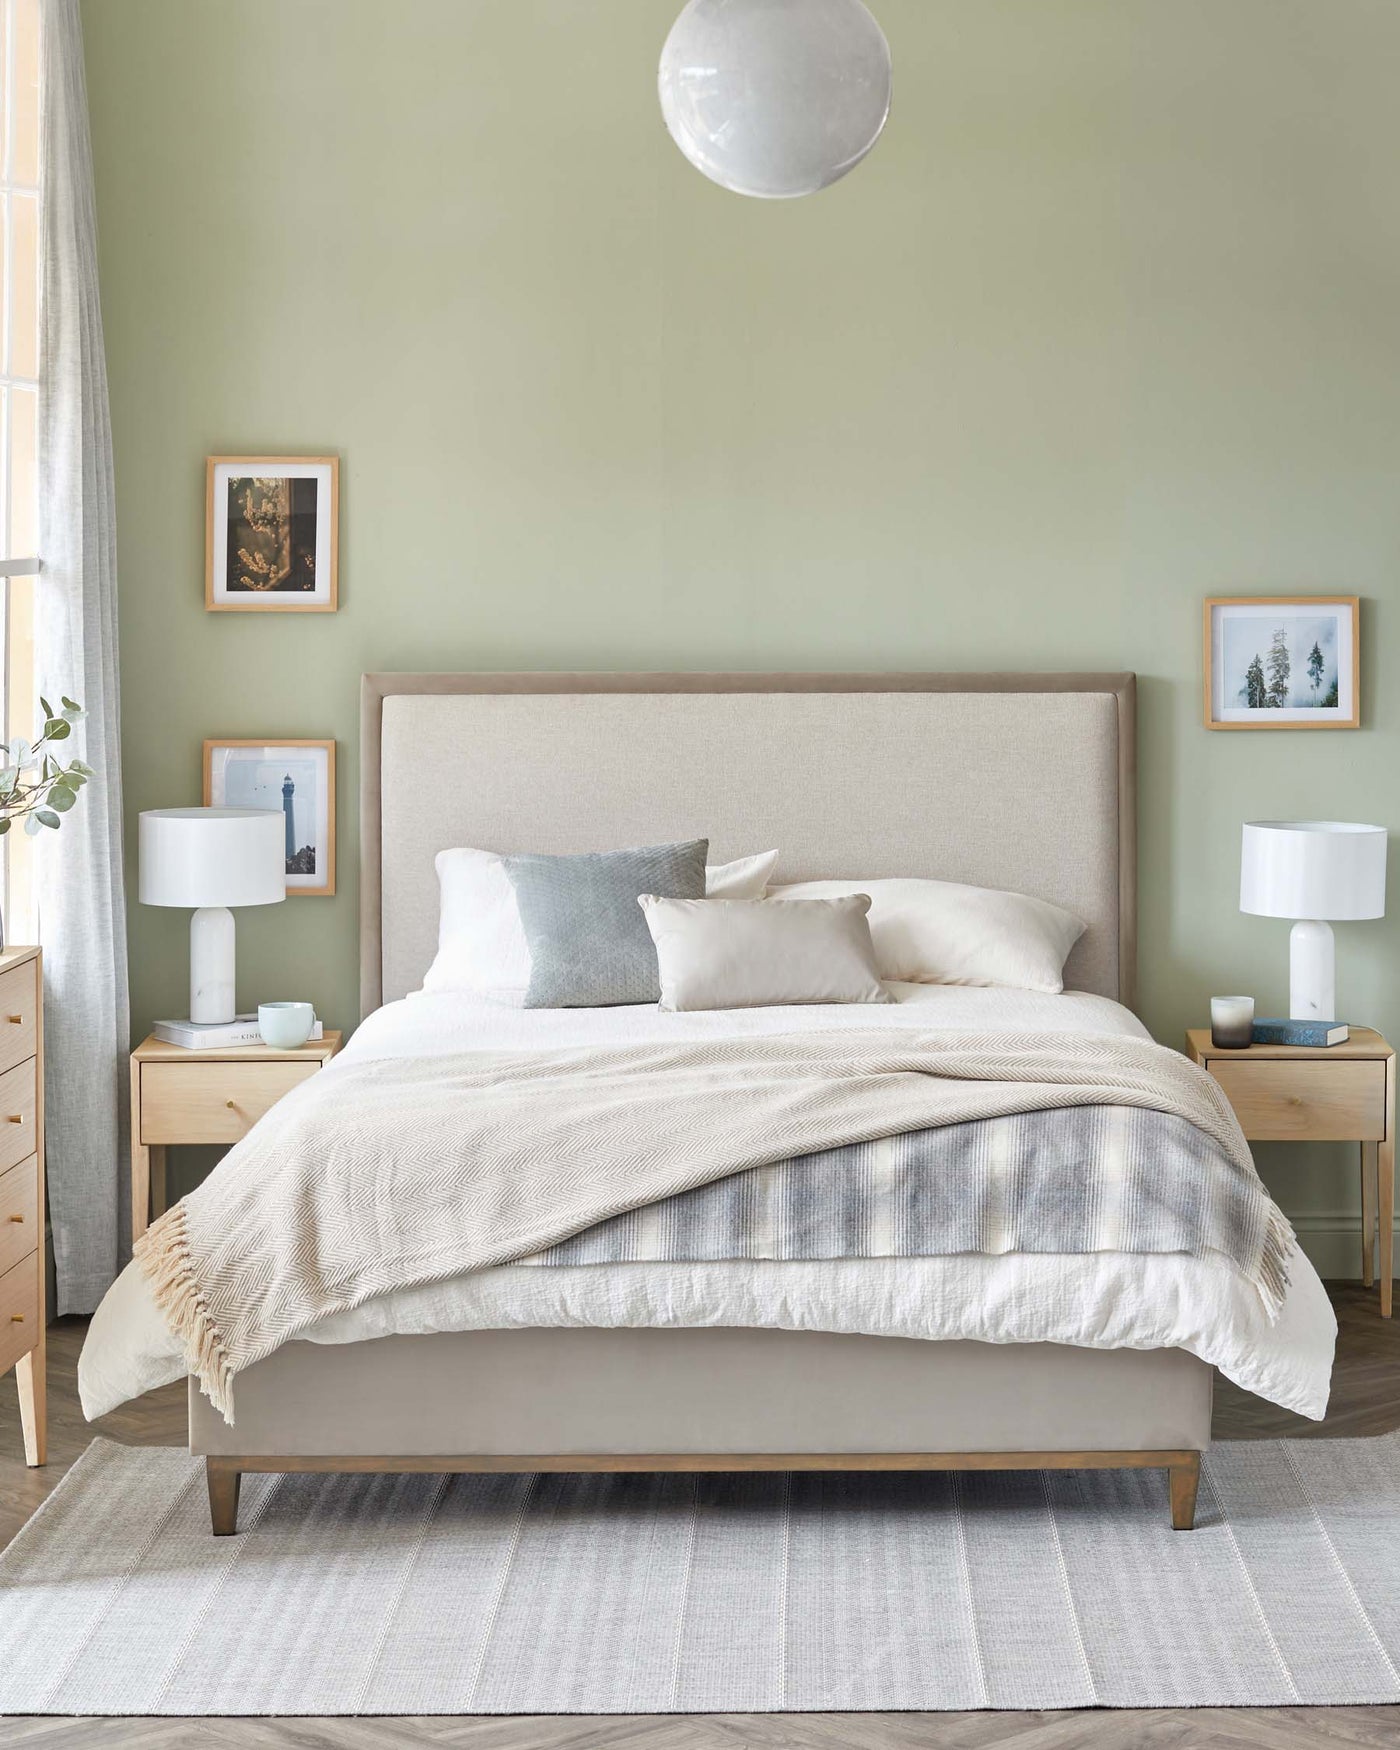 Contemporary bedroom furniture set featuring a minimalist upholstered king-size bed with a neutral-toned headboard and wooden legs, flanked by two light wood nightstands with clean lines and white table lamps. A soft beige area rug under the bed adds a layer of texture to the serene space.